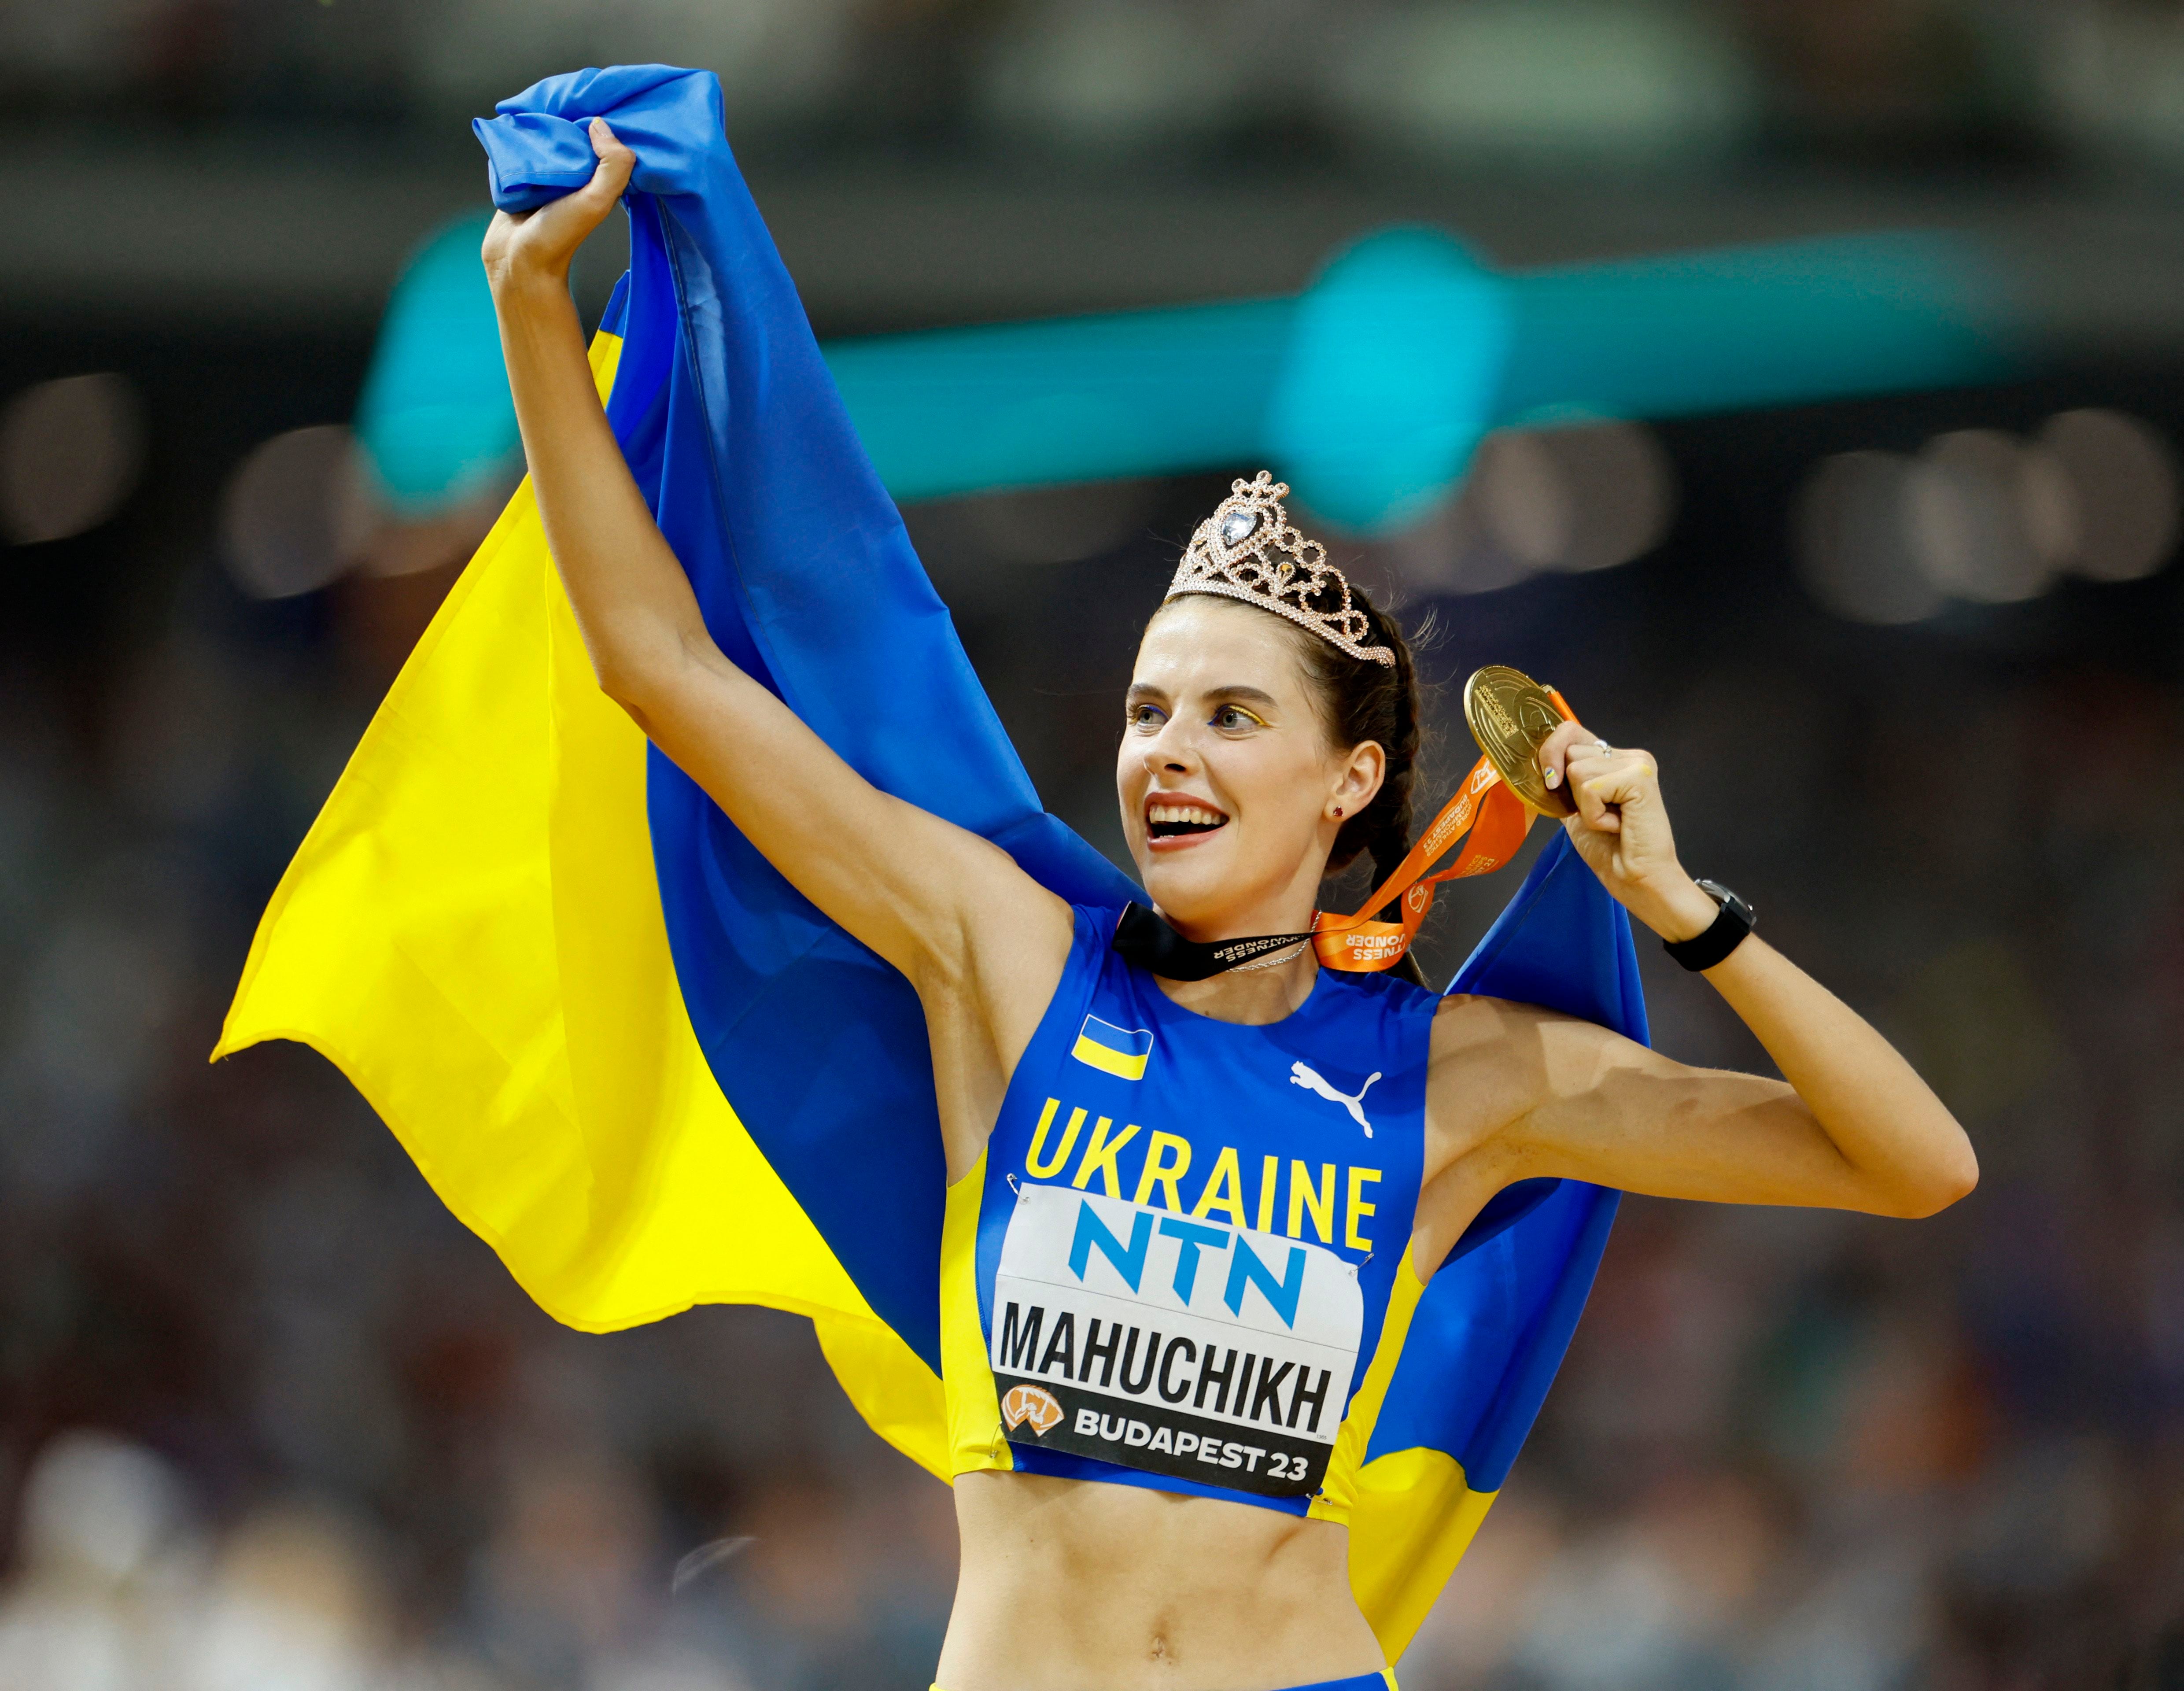 The queen of high jump. Mahuchikh awarded Ukraine its only gold medal of the tournament. 
